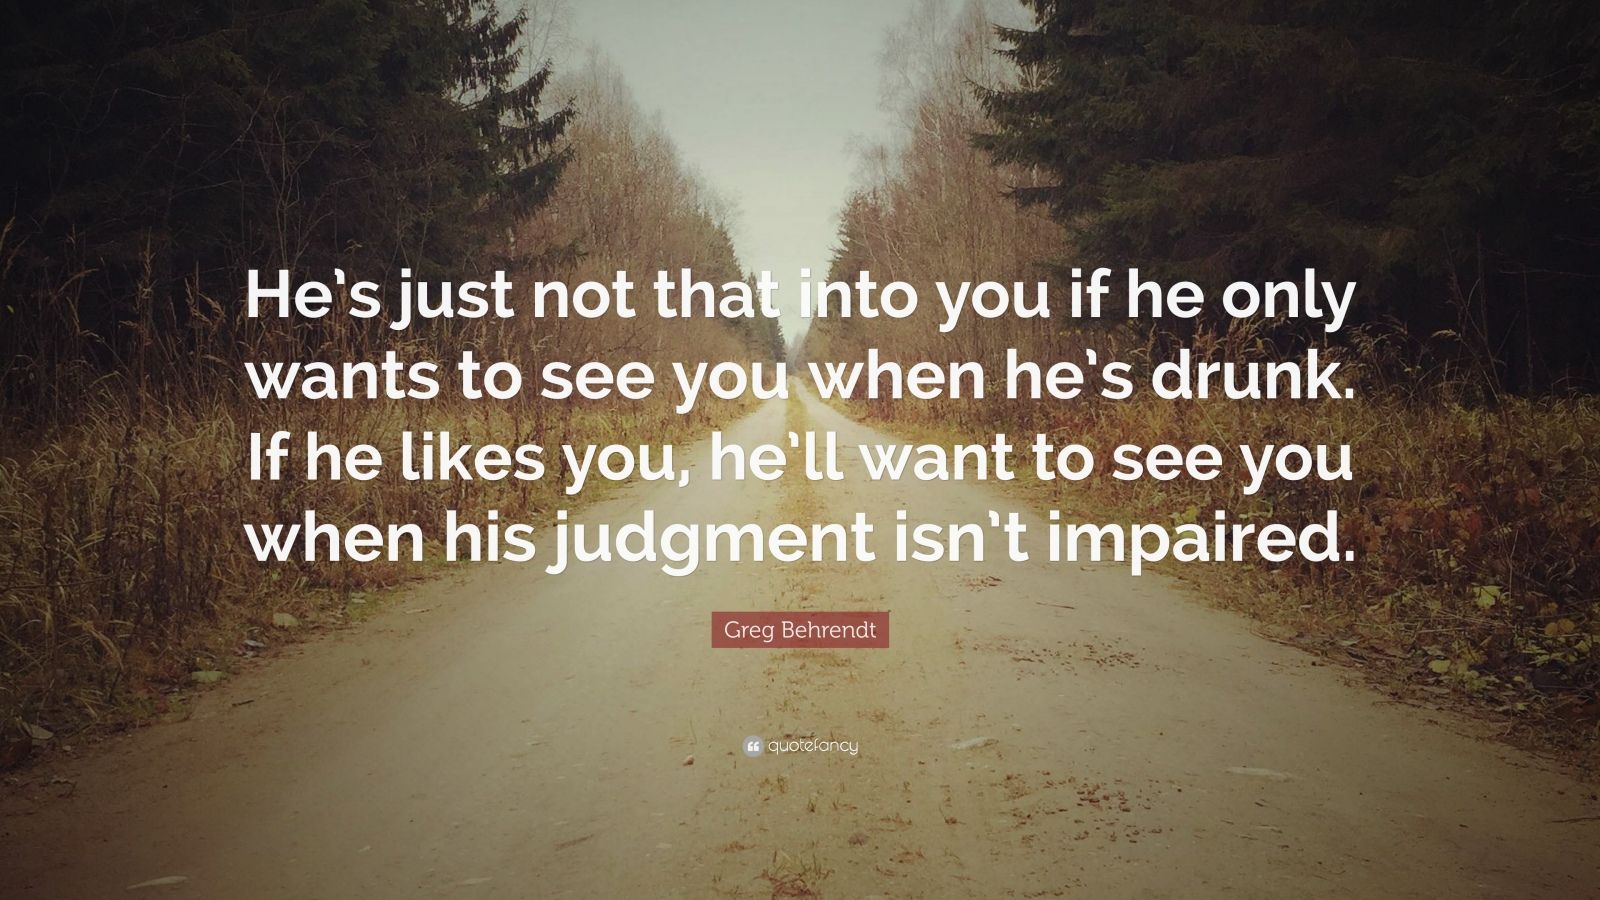 Greg Behrendt Quote: “He’s just not that into you if he only wants to ...